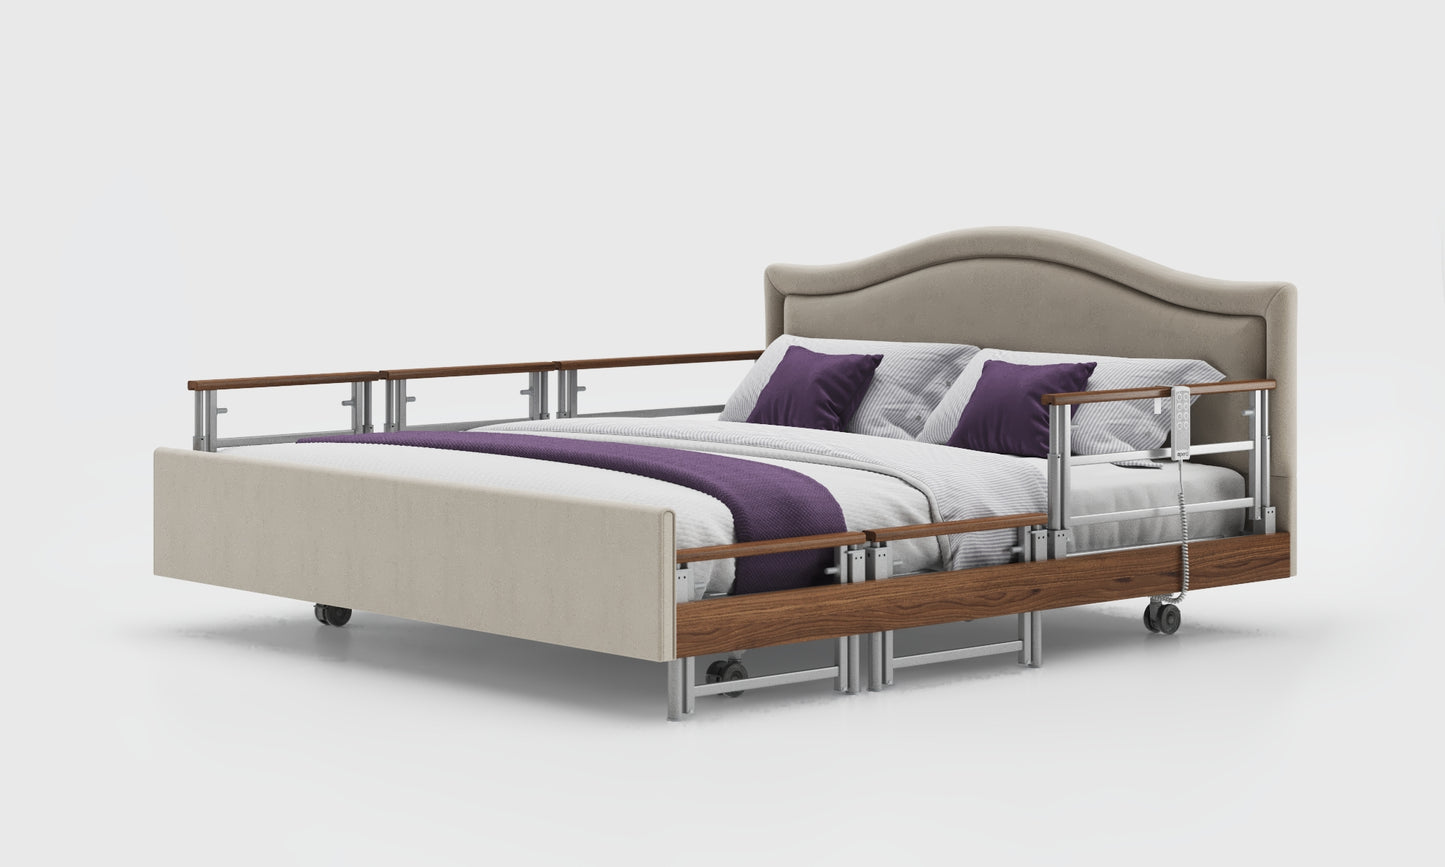 Signature comfort 6ft bed with walnut tri rails and pearl headboard in sisal leather